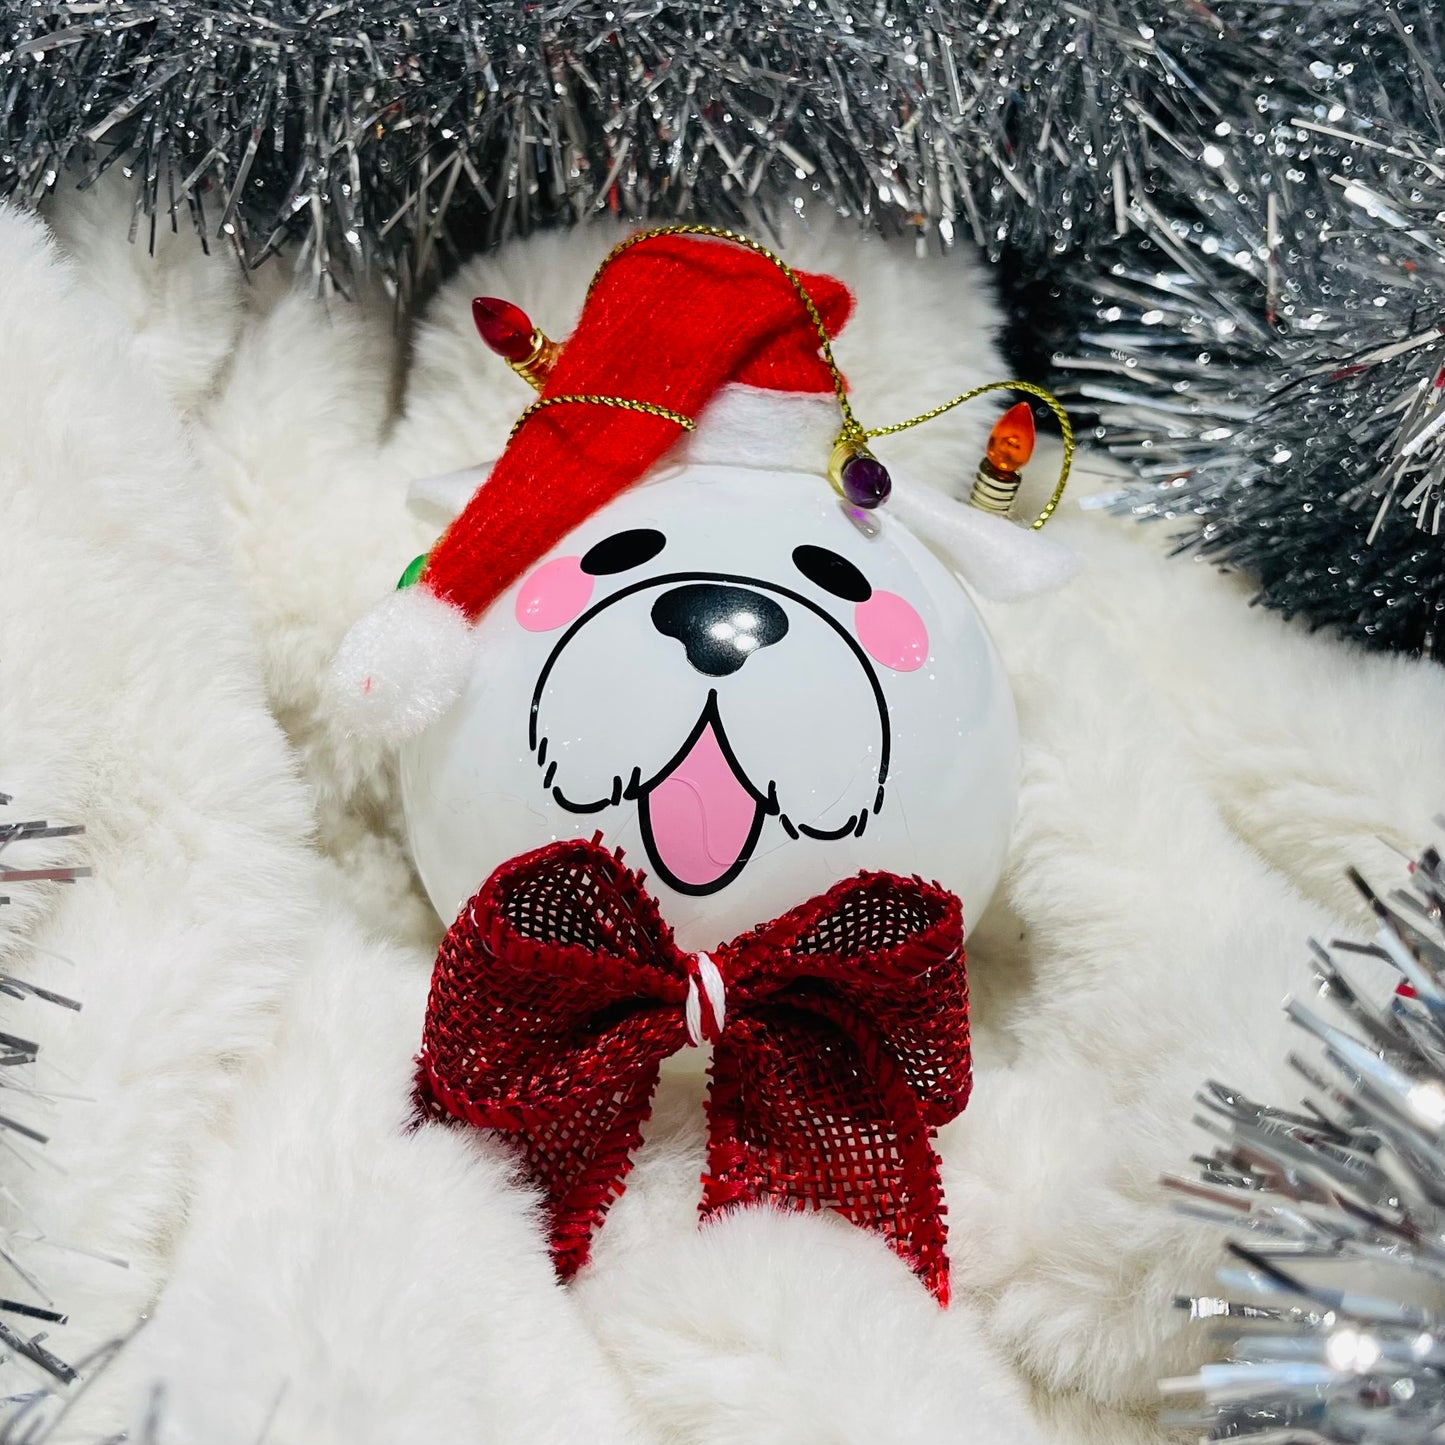 White Doggy Ornaments